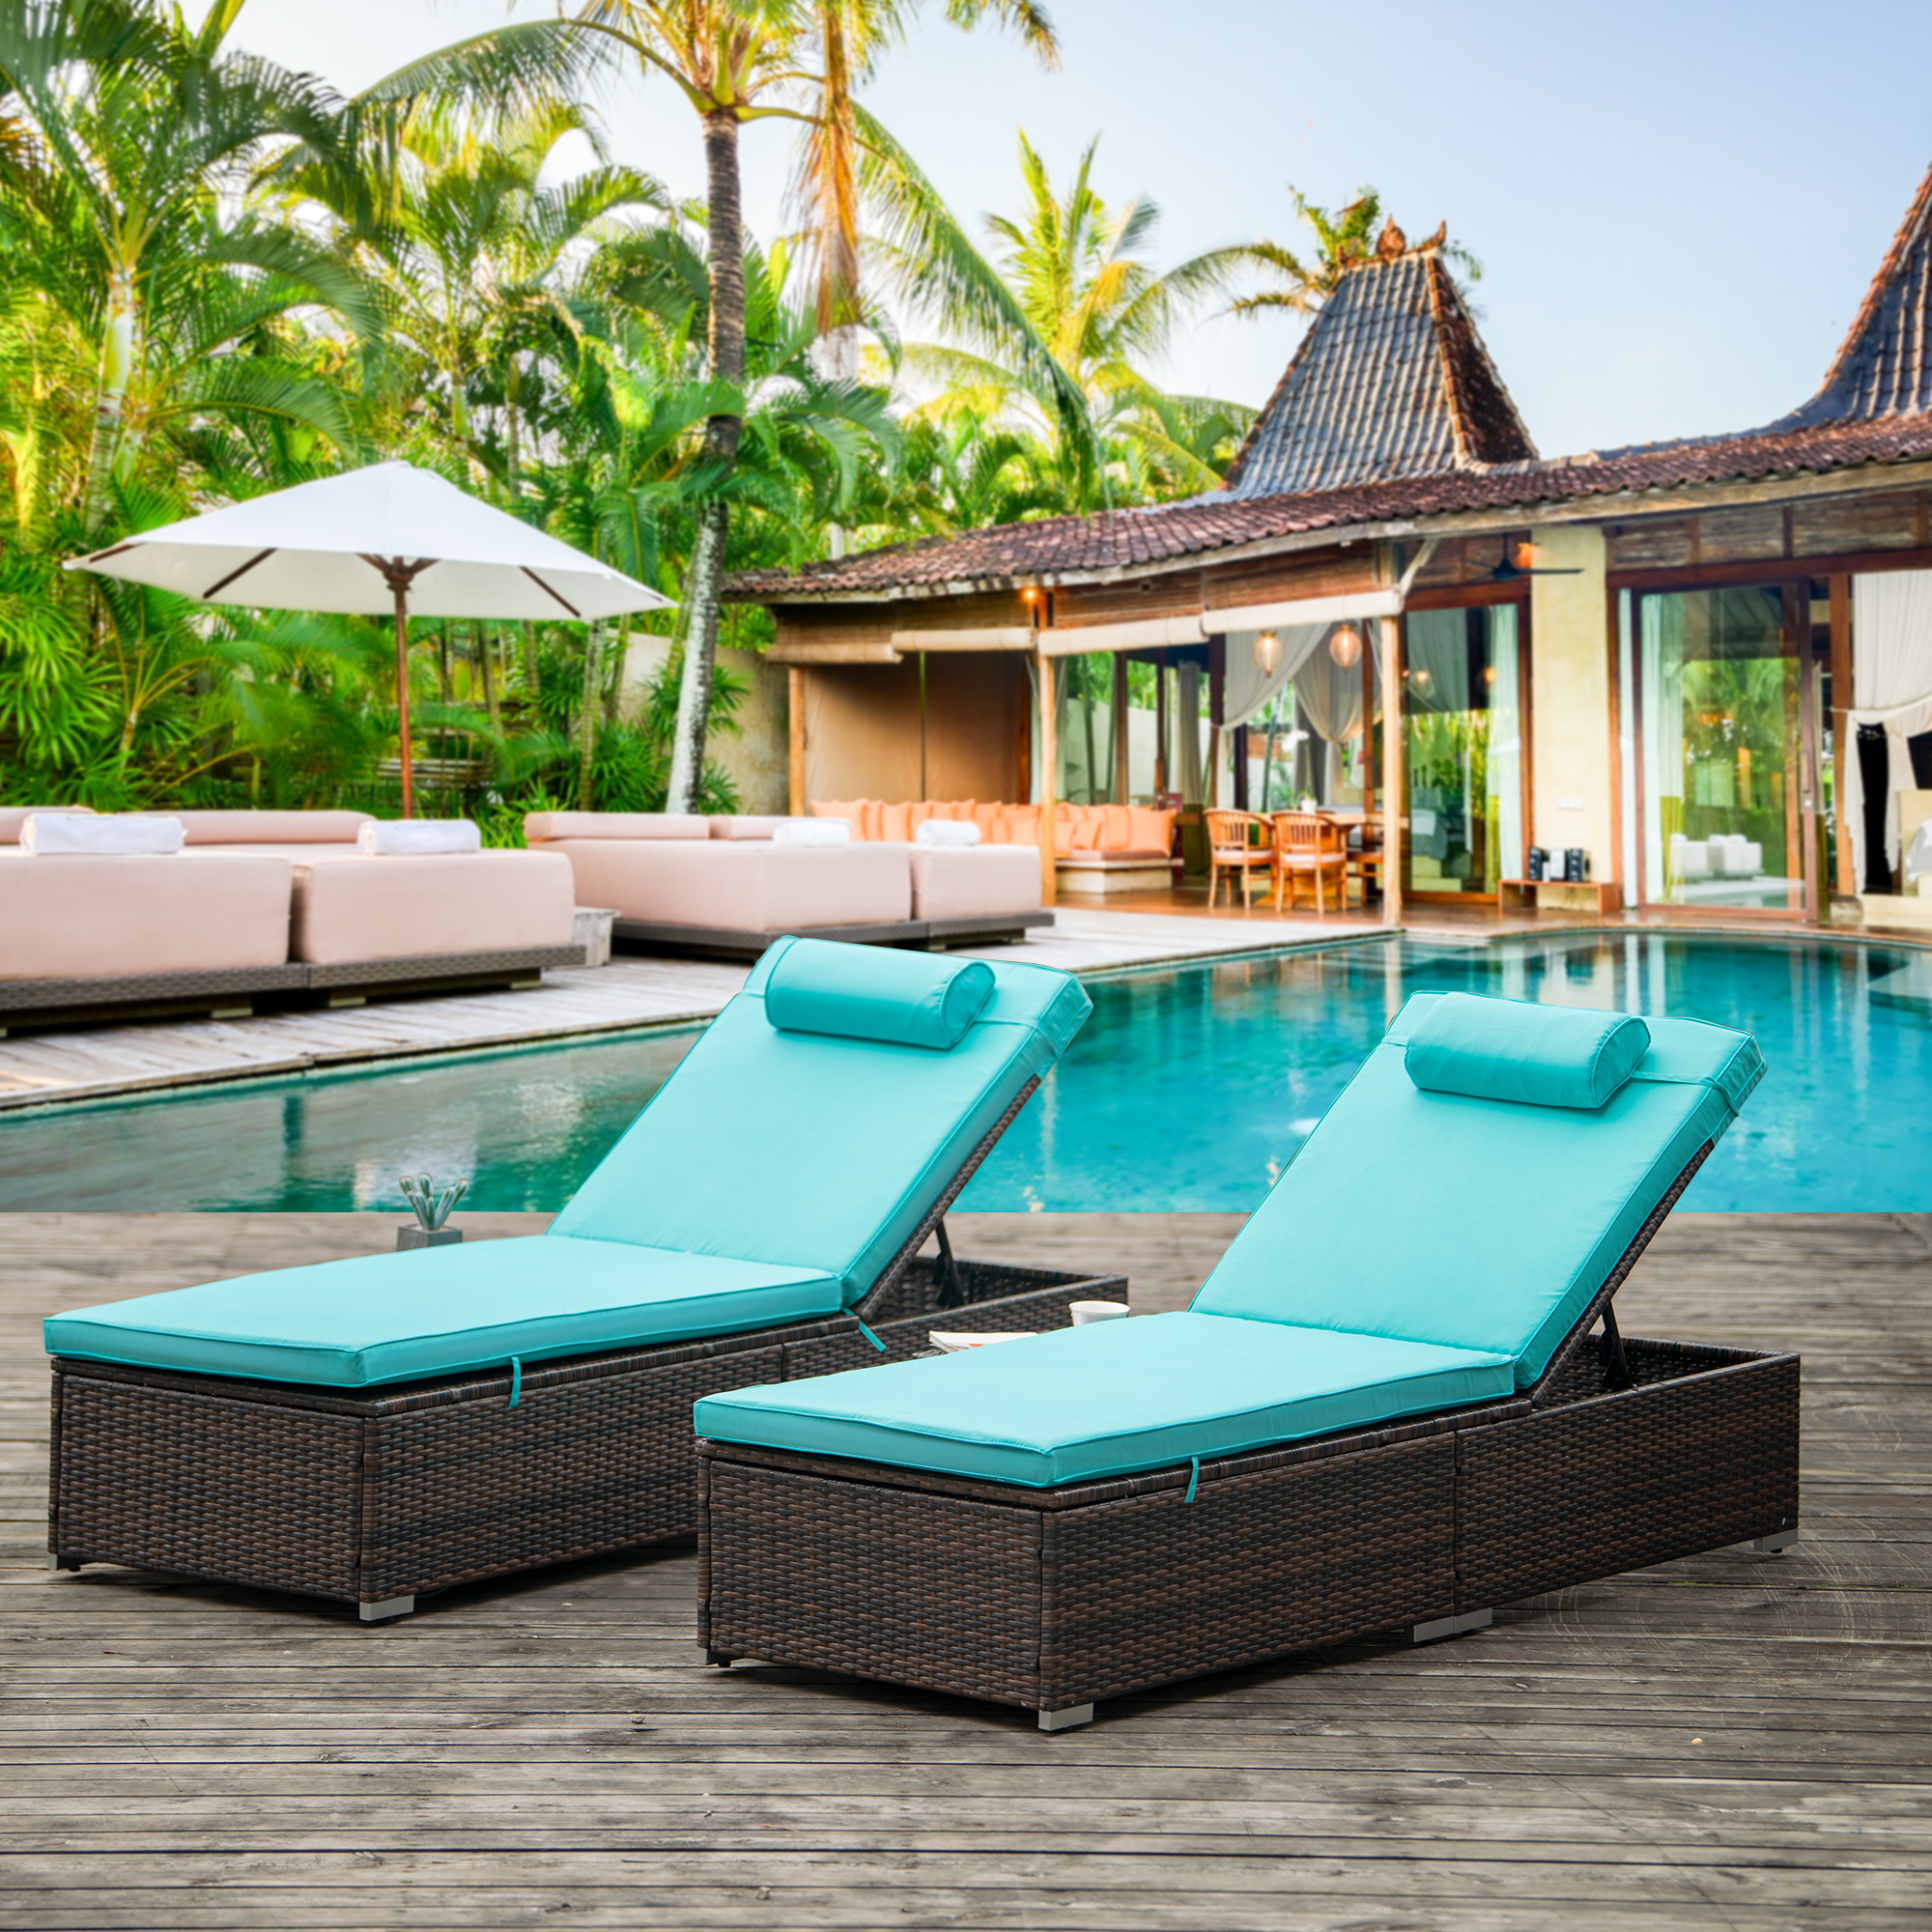 Clearance! Patio Chaise Lounge Chairs, 2 Piece Outdoor Wicker Adjustable Backrest Recliners with Seat Cushion, Side Table&Head Pillow, Modern Rattan Reclining Chair Set for Balcony Pool Deck, J2474 - image 1 of 14